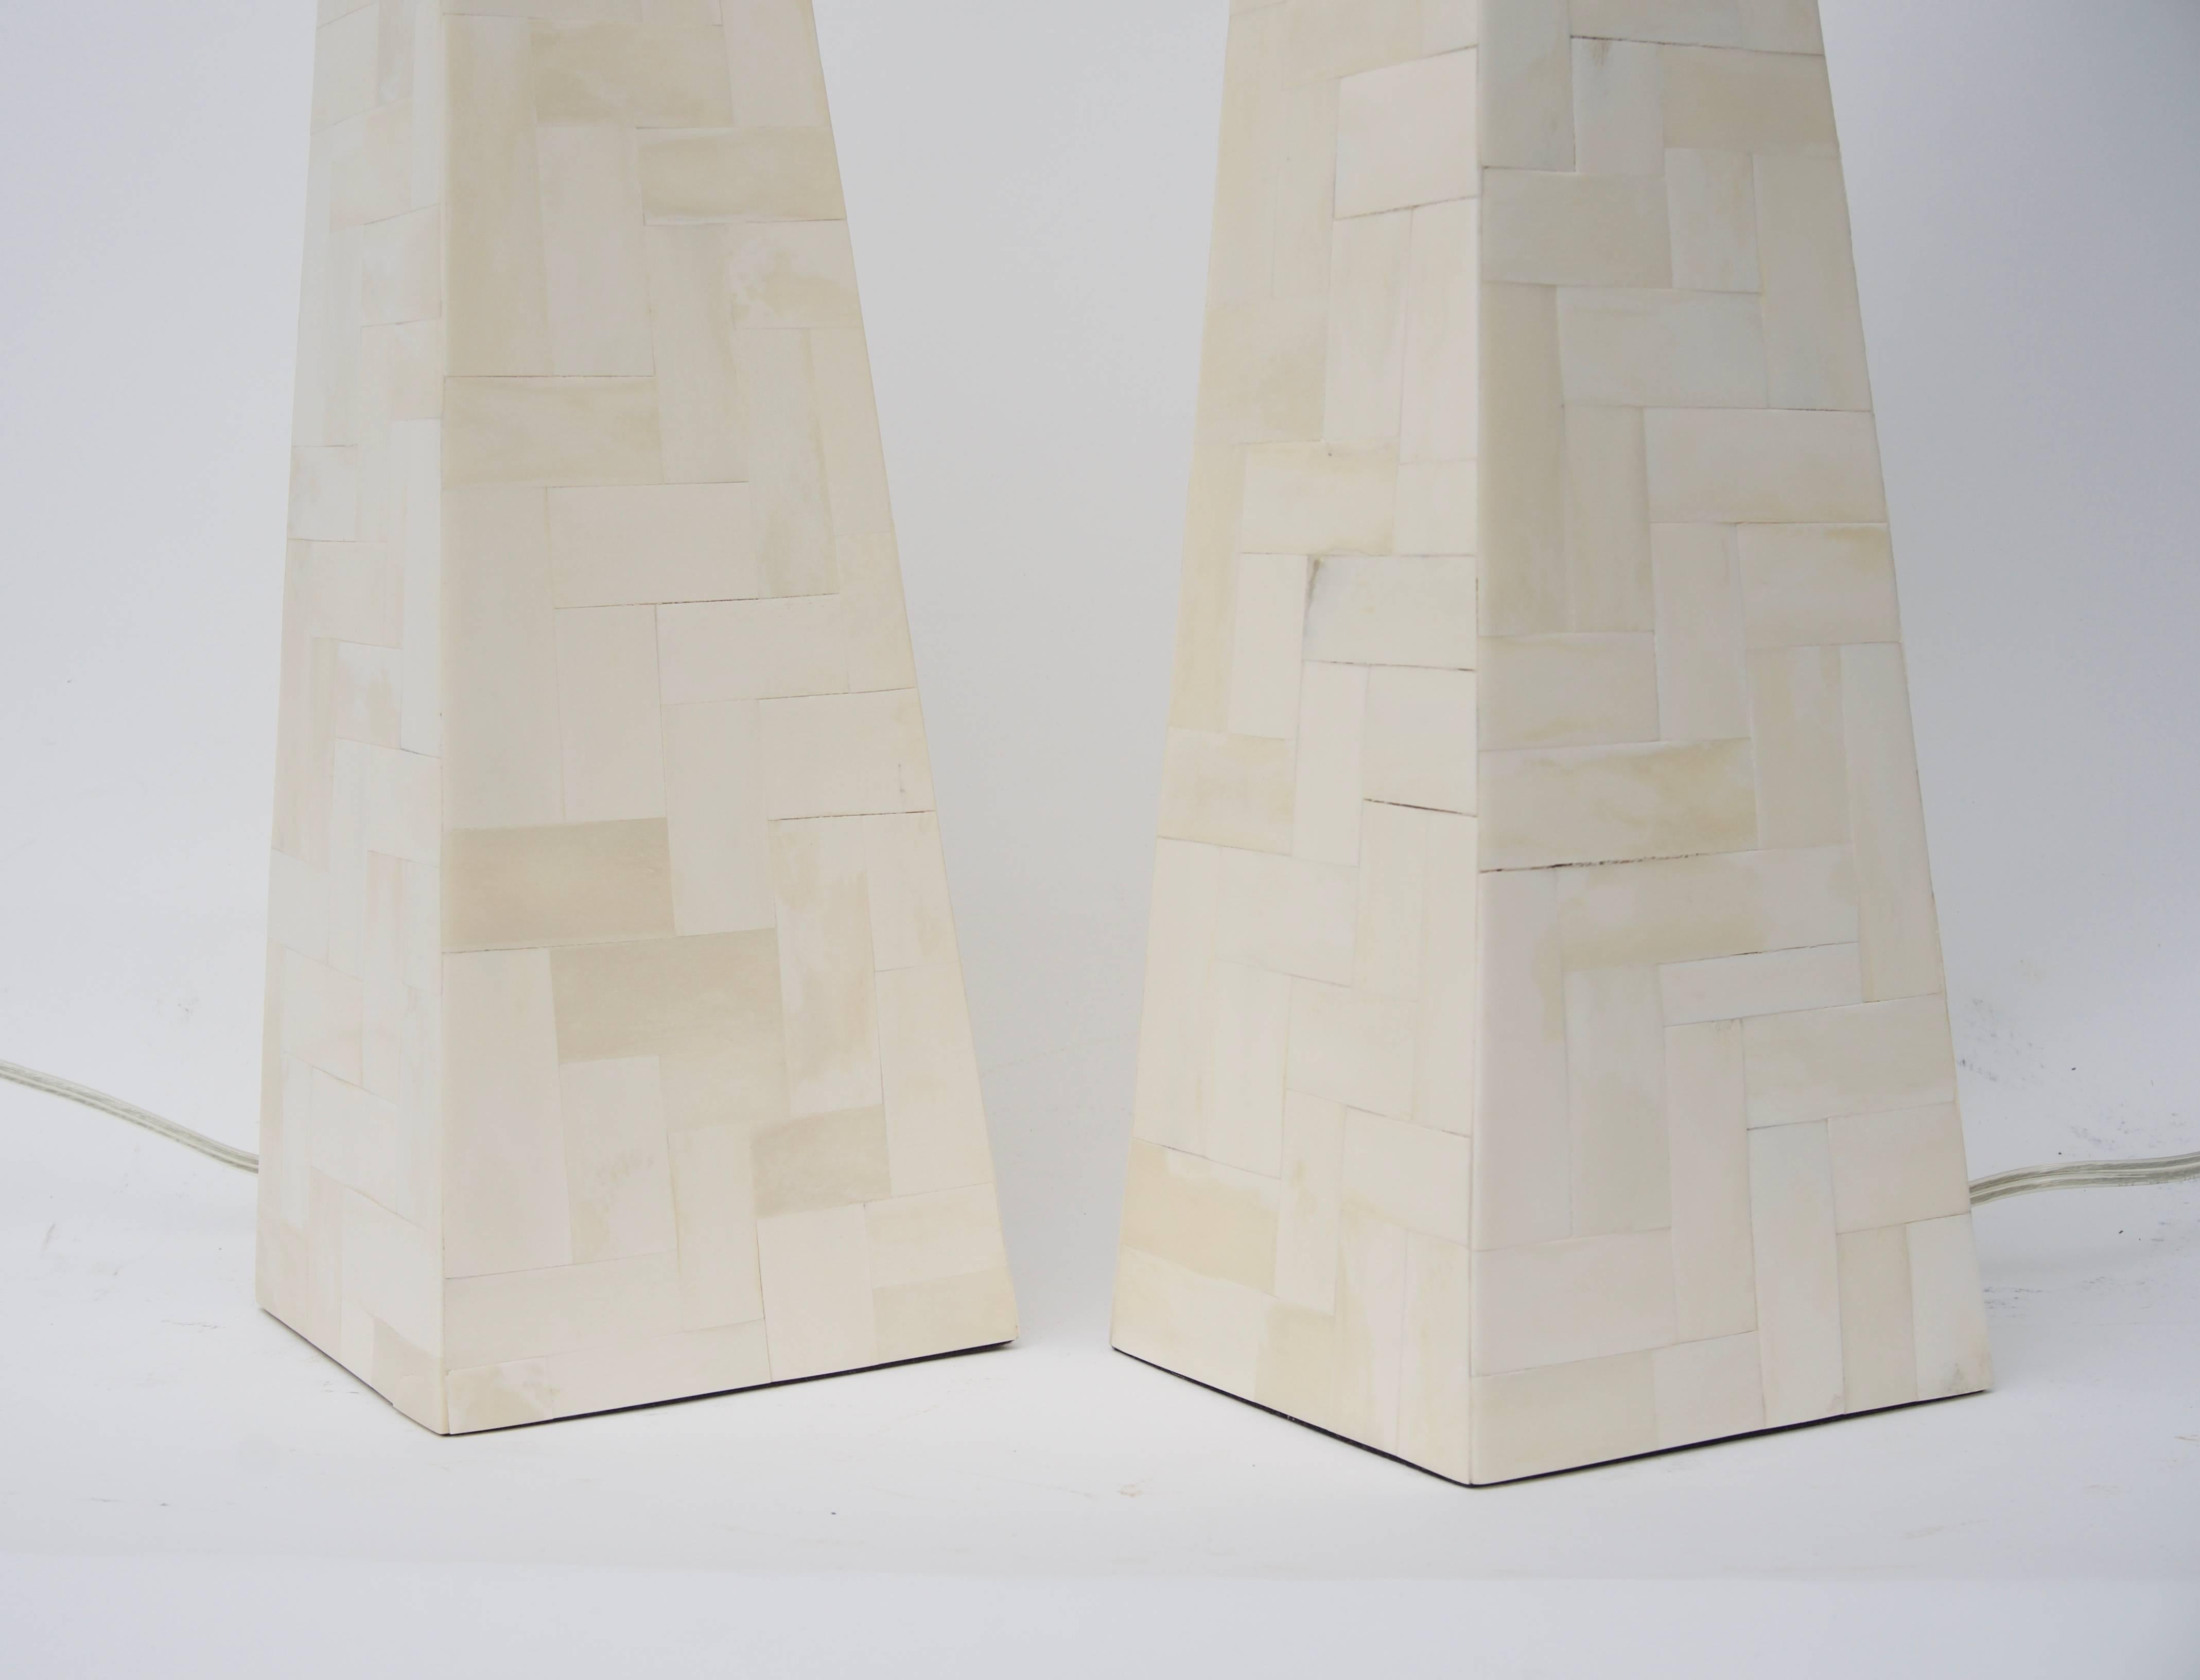 Polished Pair of Tessellated Bone Table Lamps Enrique Garciel